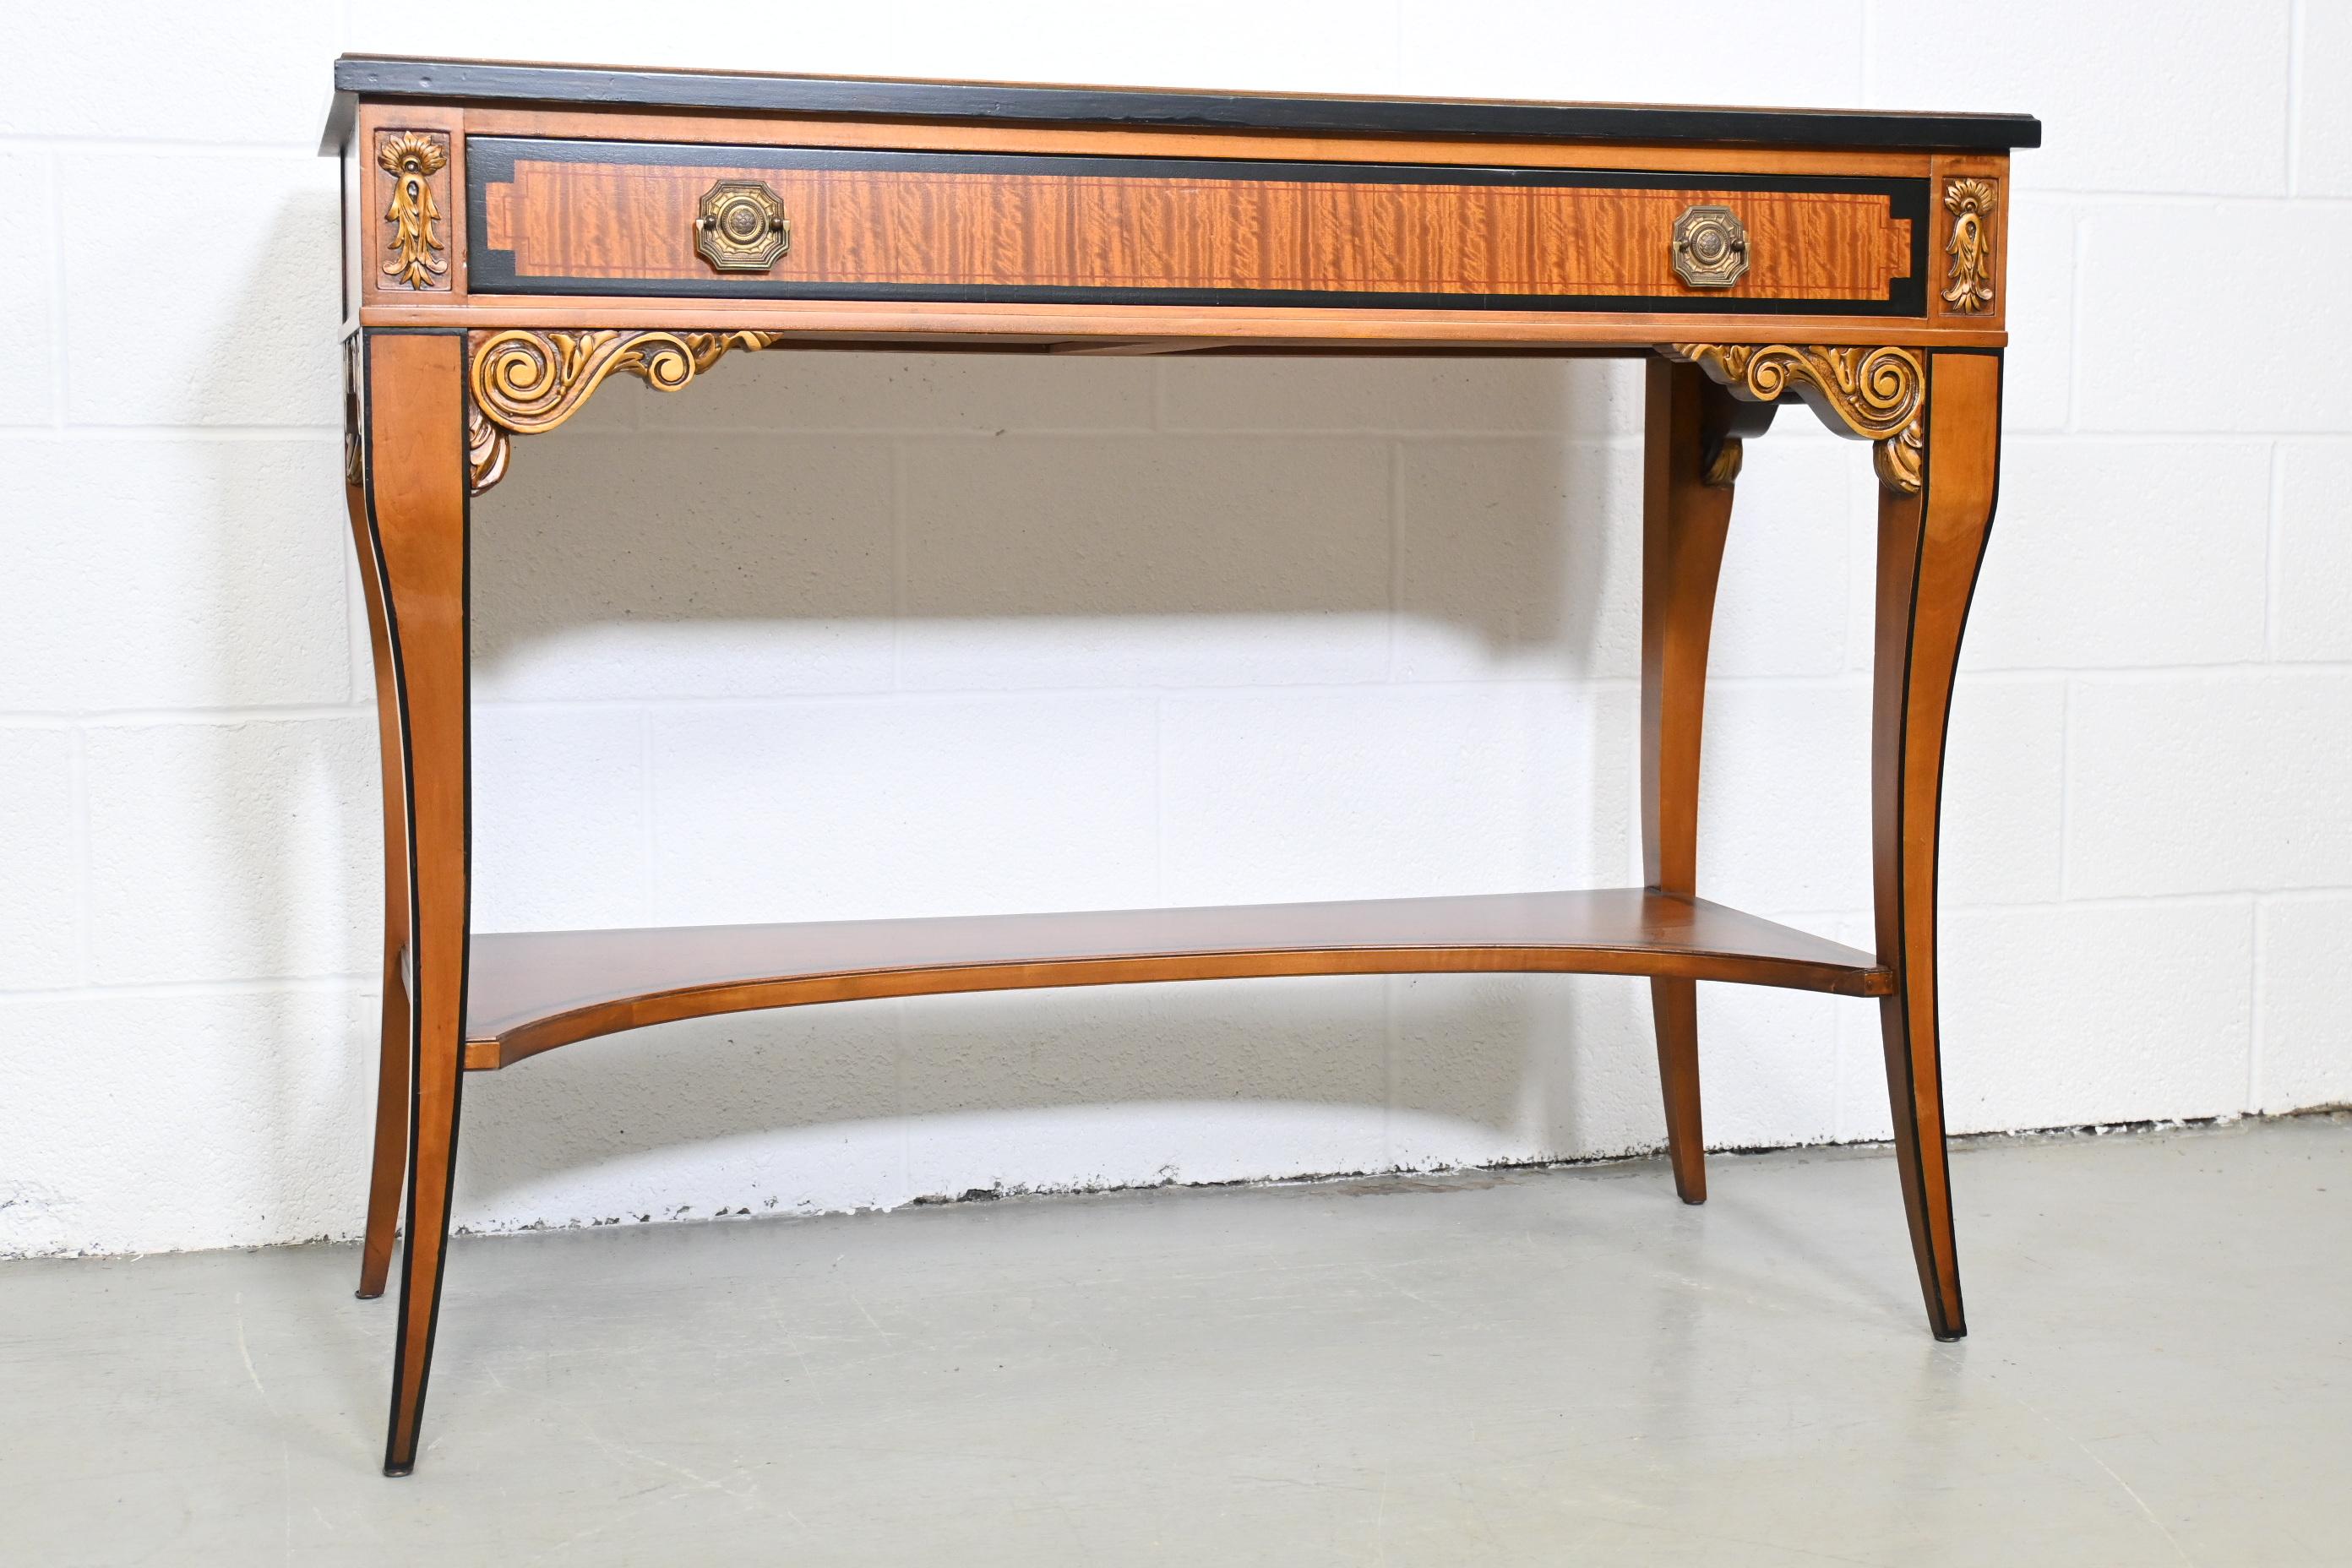 Berkey & Gay Console Table or Entry Table

Berkey & Gay, USA, 1920s

Measures: 42 Wide x 18 Deep x 32.25

1920s hand crafted antique console table with hand painted details and brass pulls.

Professionally Restored. Great antique condition